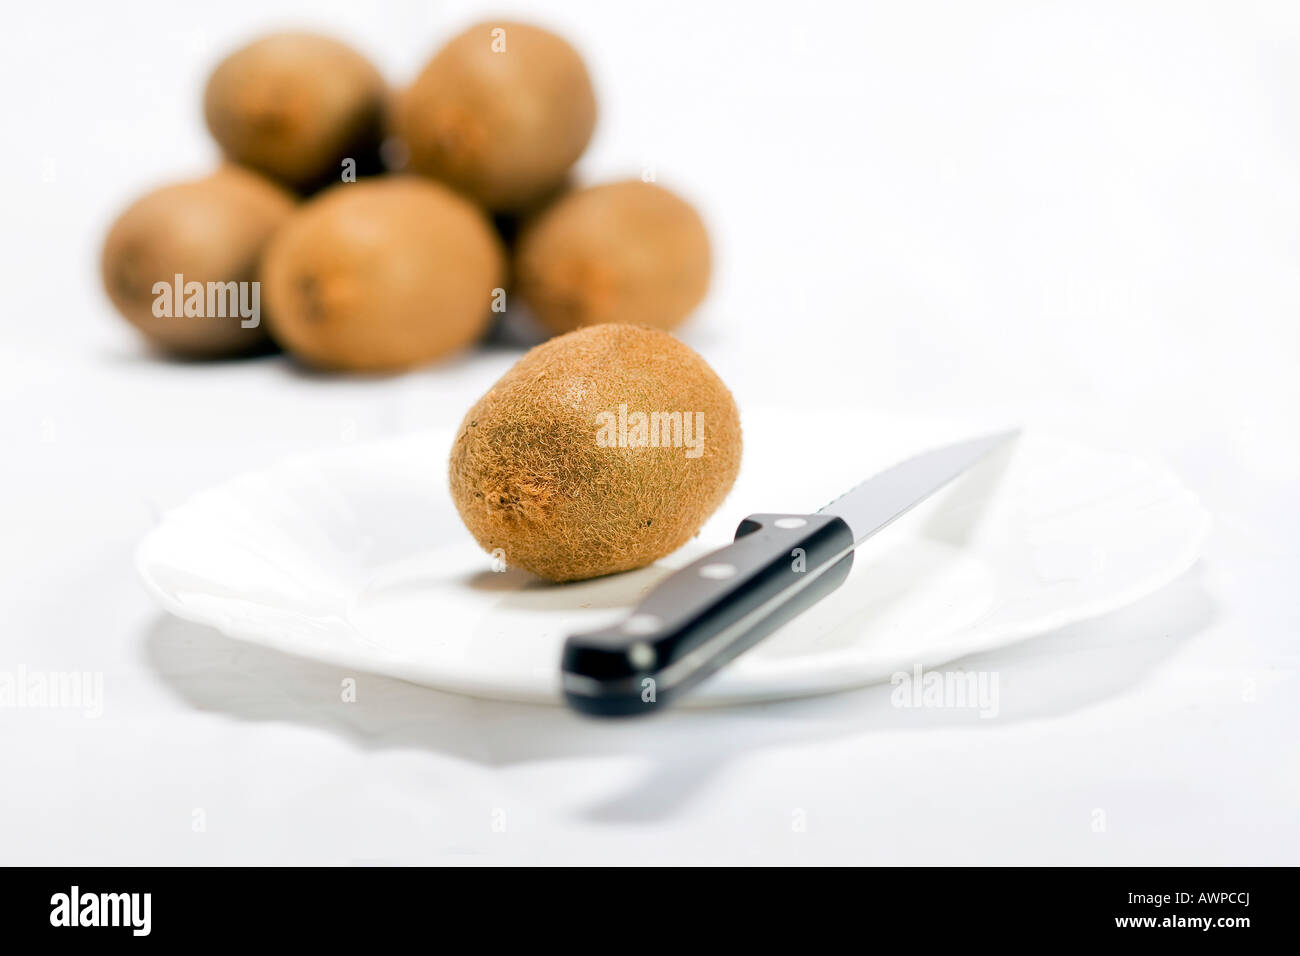 Single kiwi on a plate with knife, more kiwis piled at the back Stock Photo